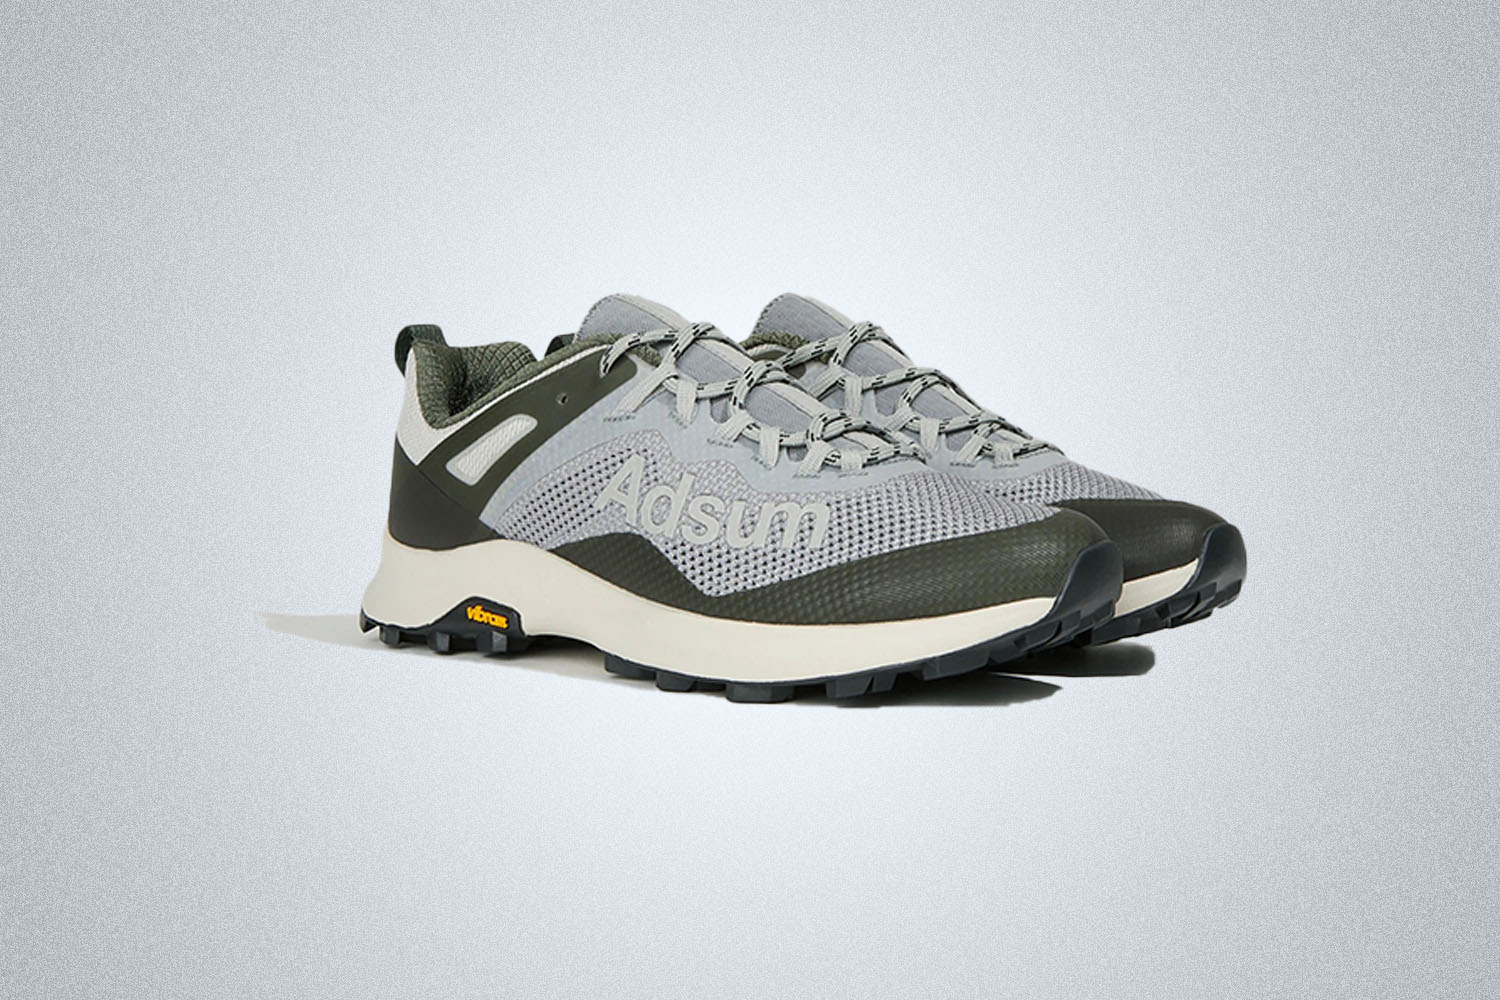 A pair of grey Merrell trail shoes with Adsum branding on grey background